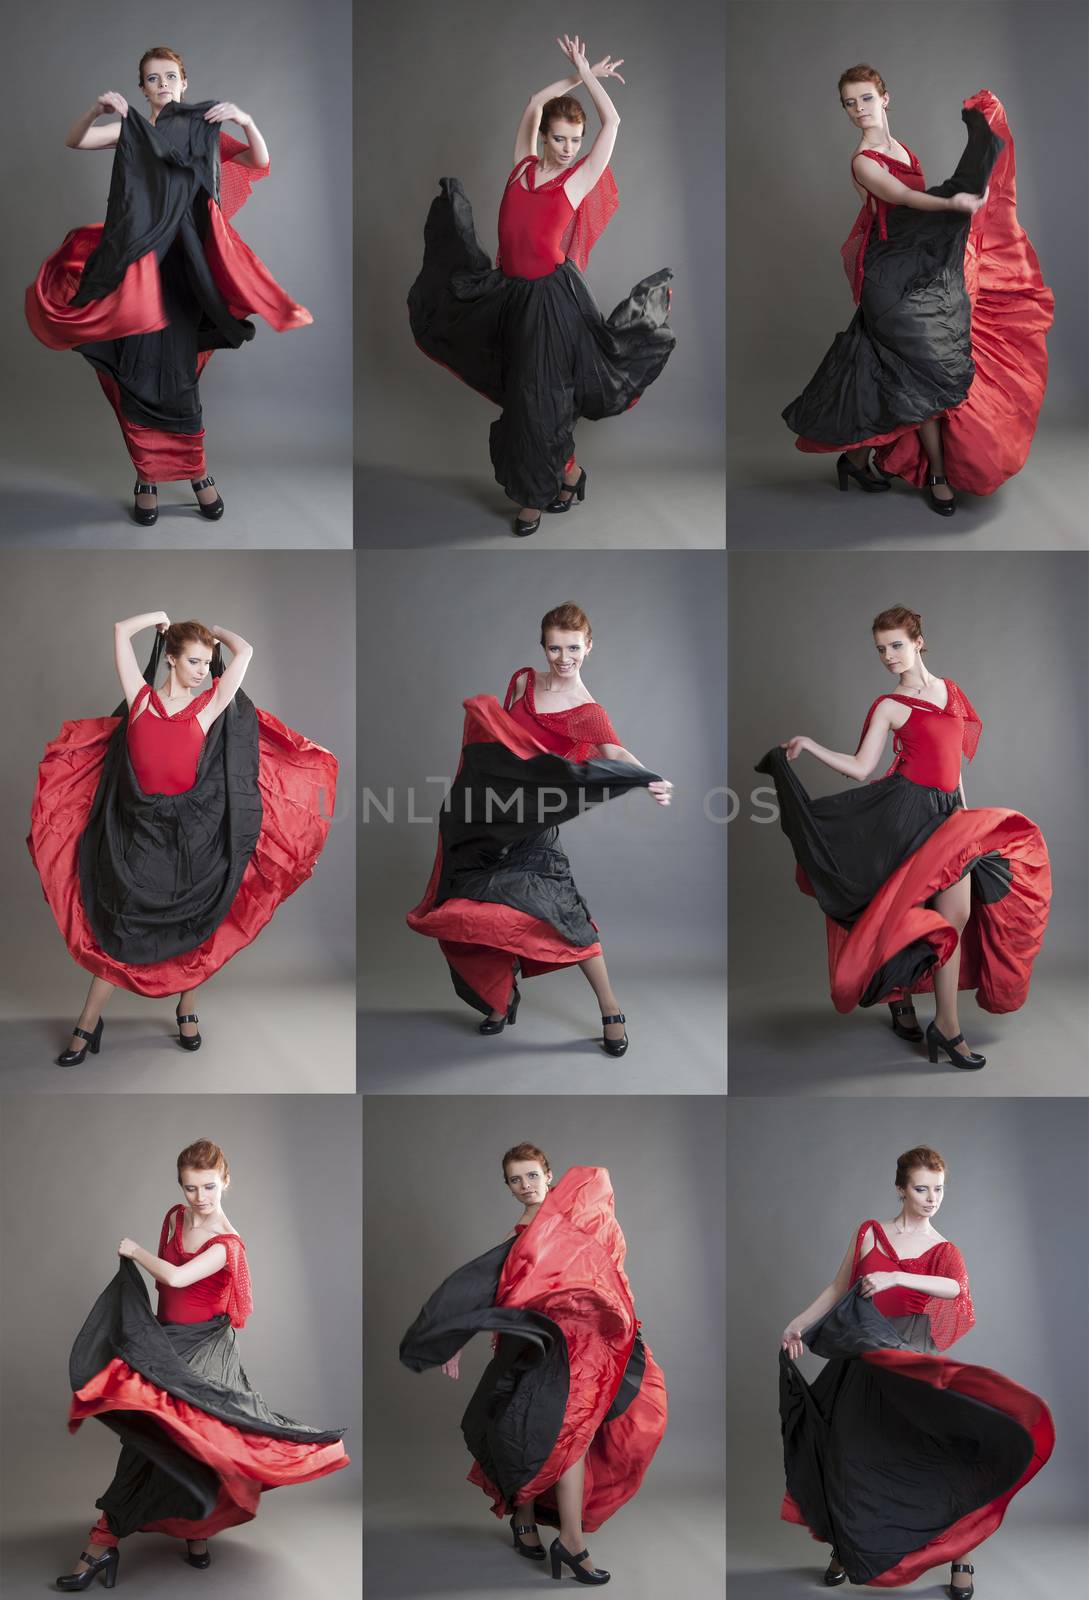 woman in the red dress dancing flamenco on a grey background